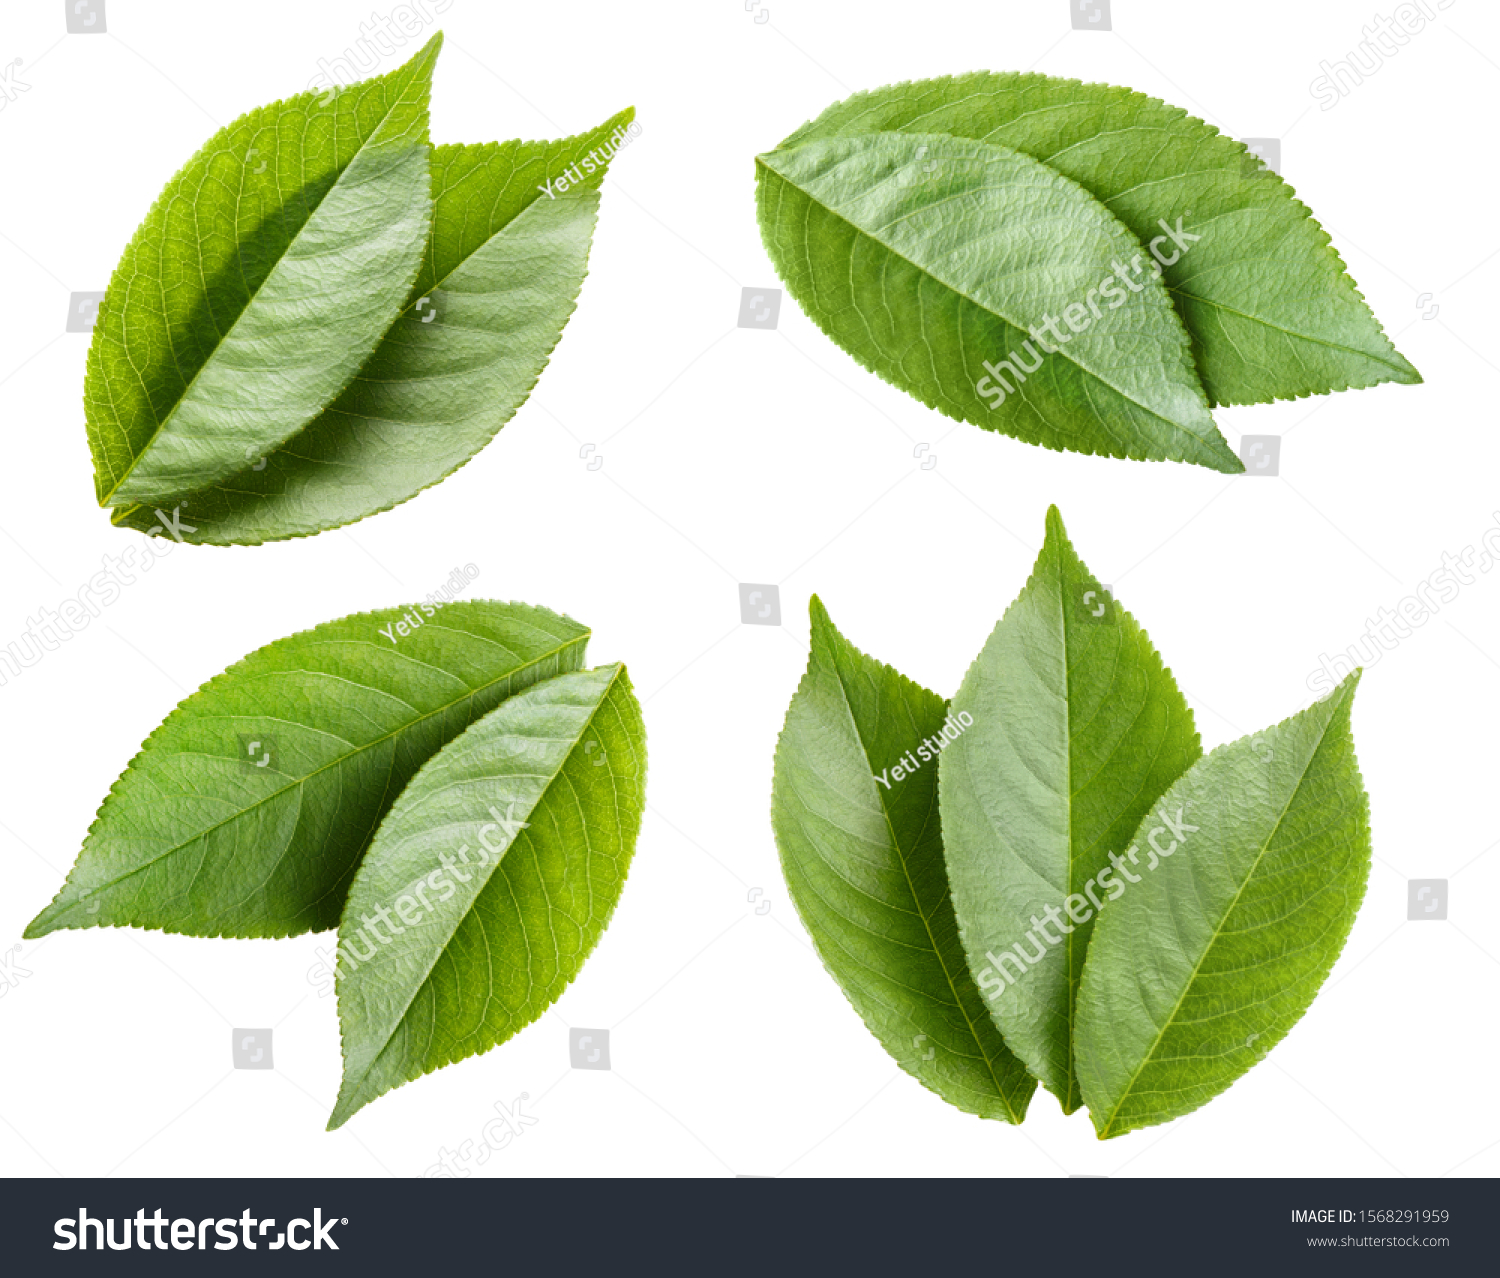 Collection of green leaves, isolated on white background #1568291959